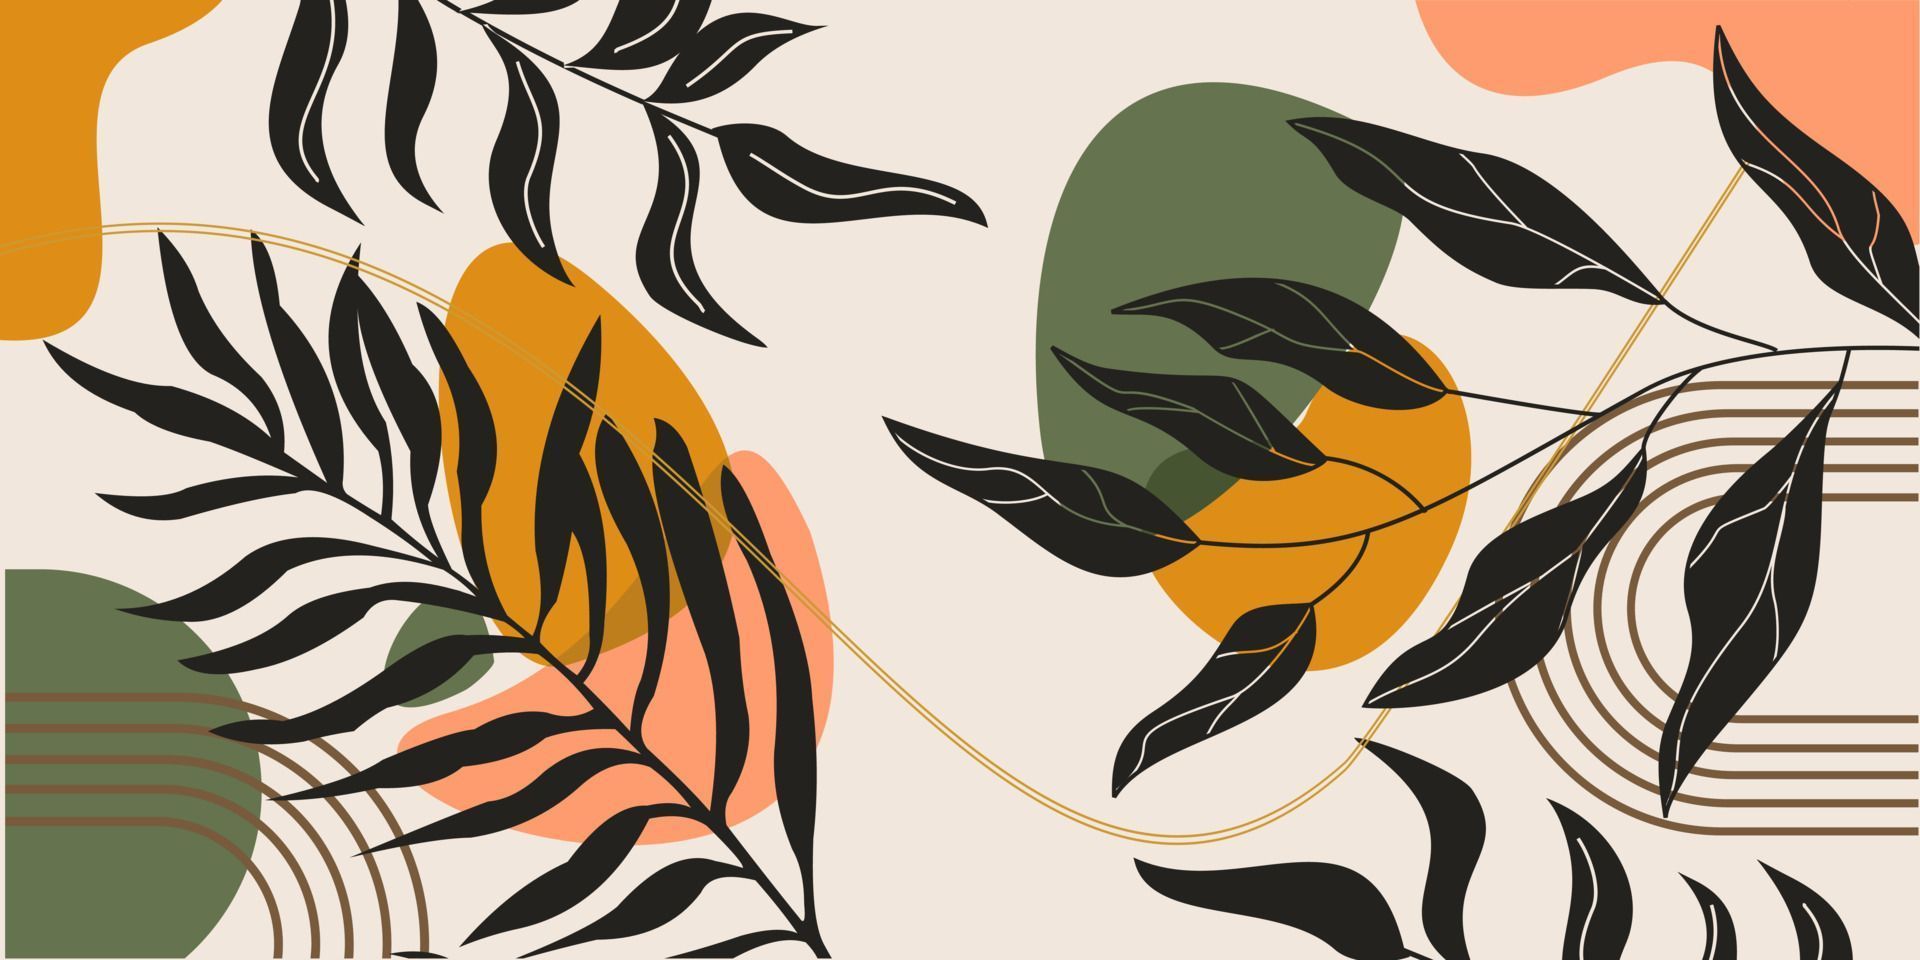 A digital artwork with an abstract design of green, yellow and orange leaves on a cream background - Art, simple, design, nature, abstract, profile picture, pattern, illustration, vector